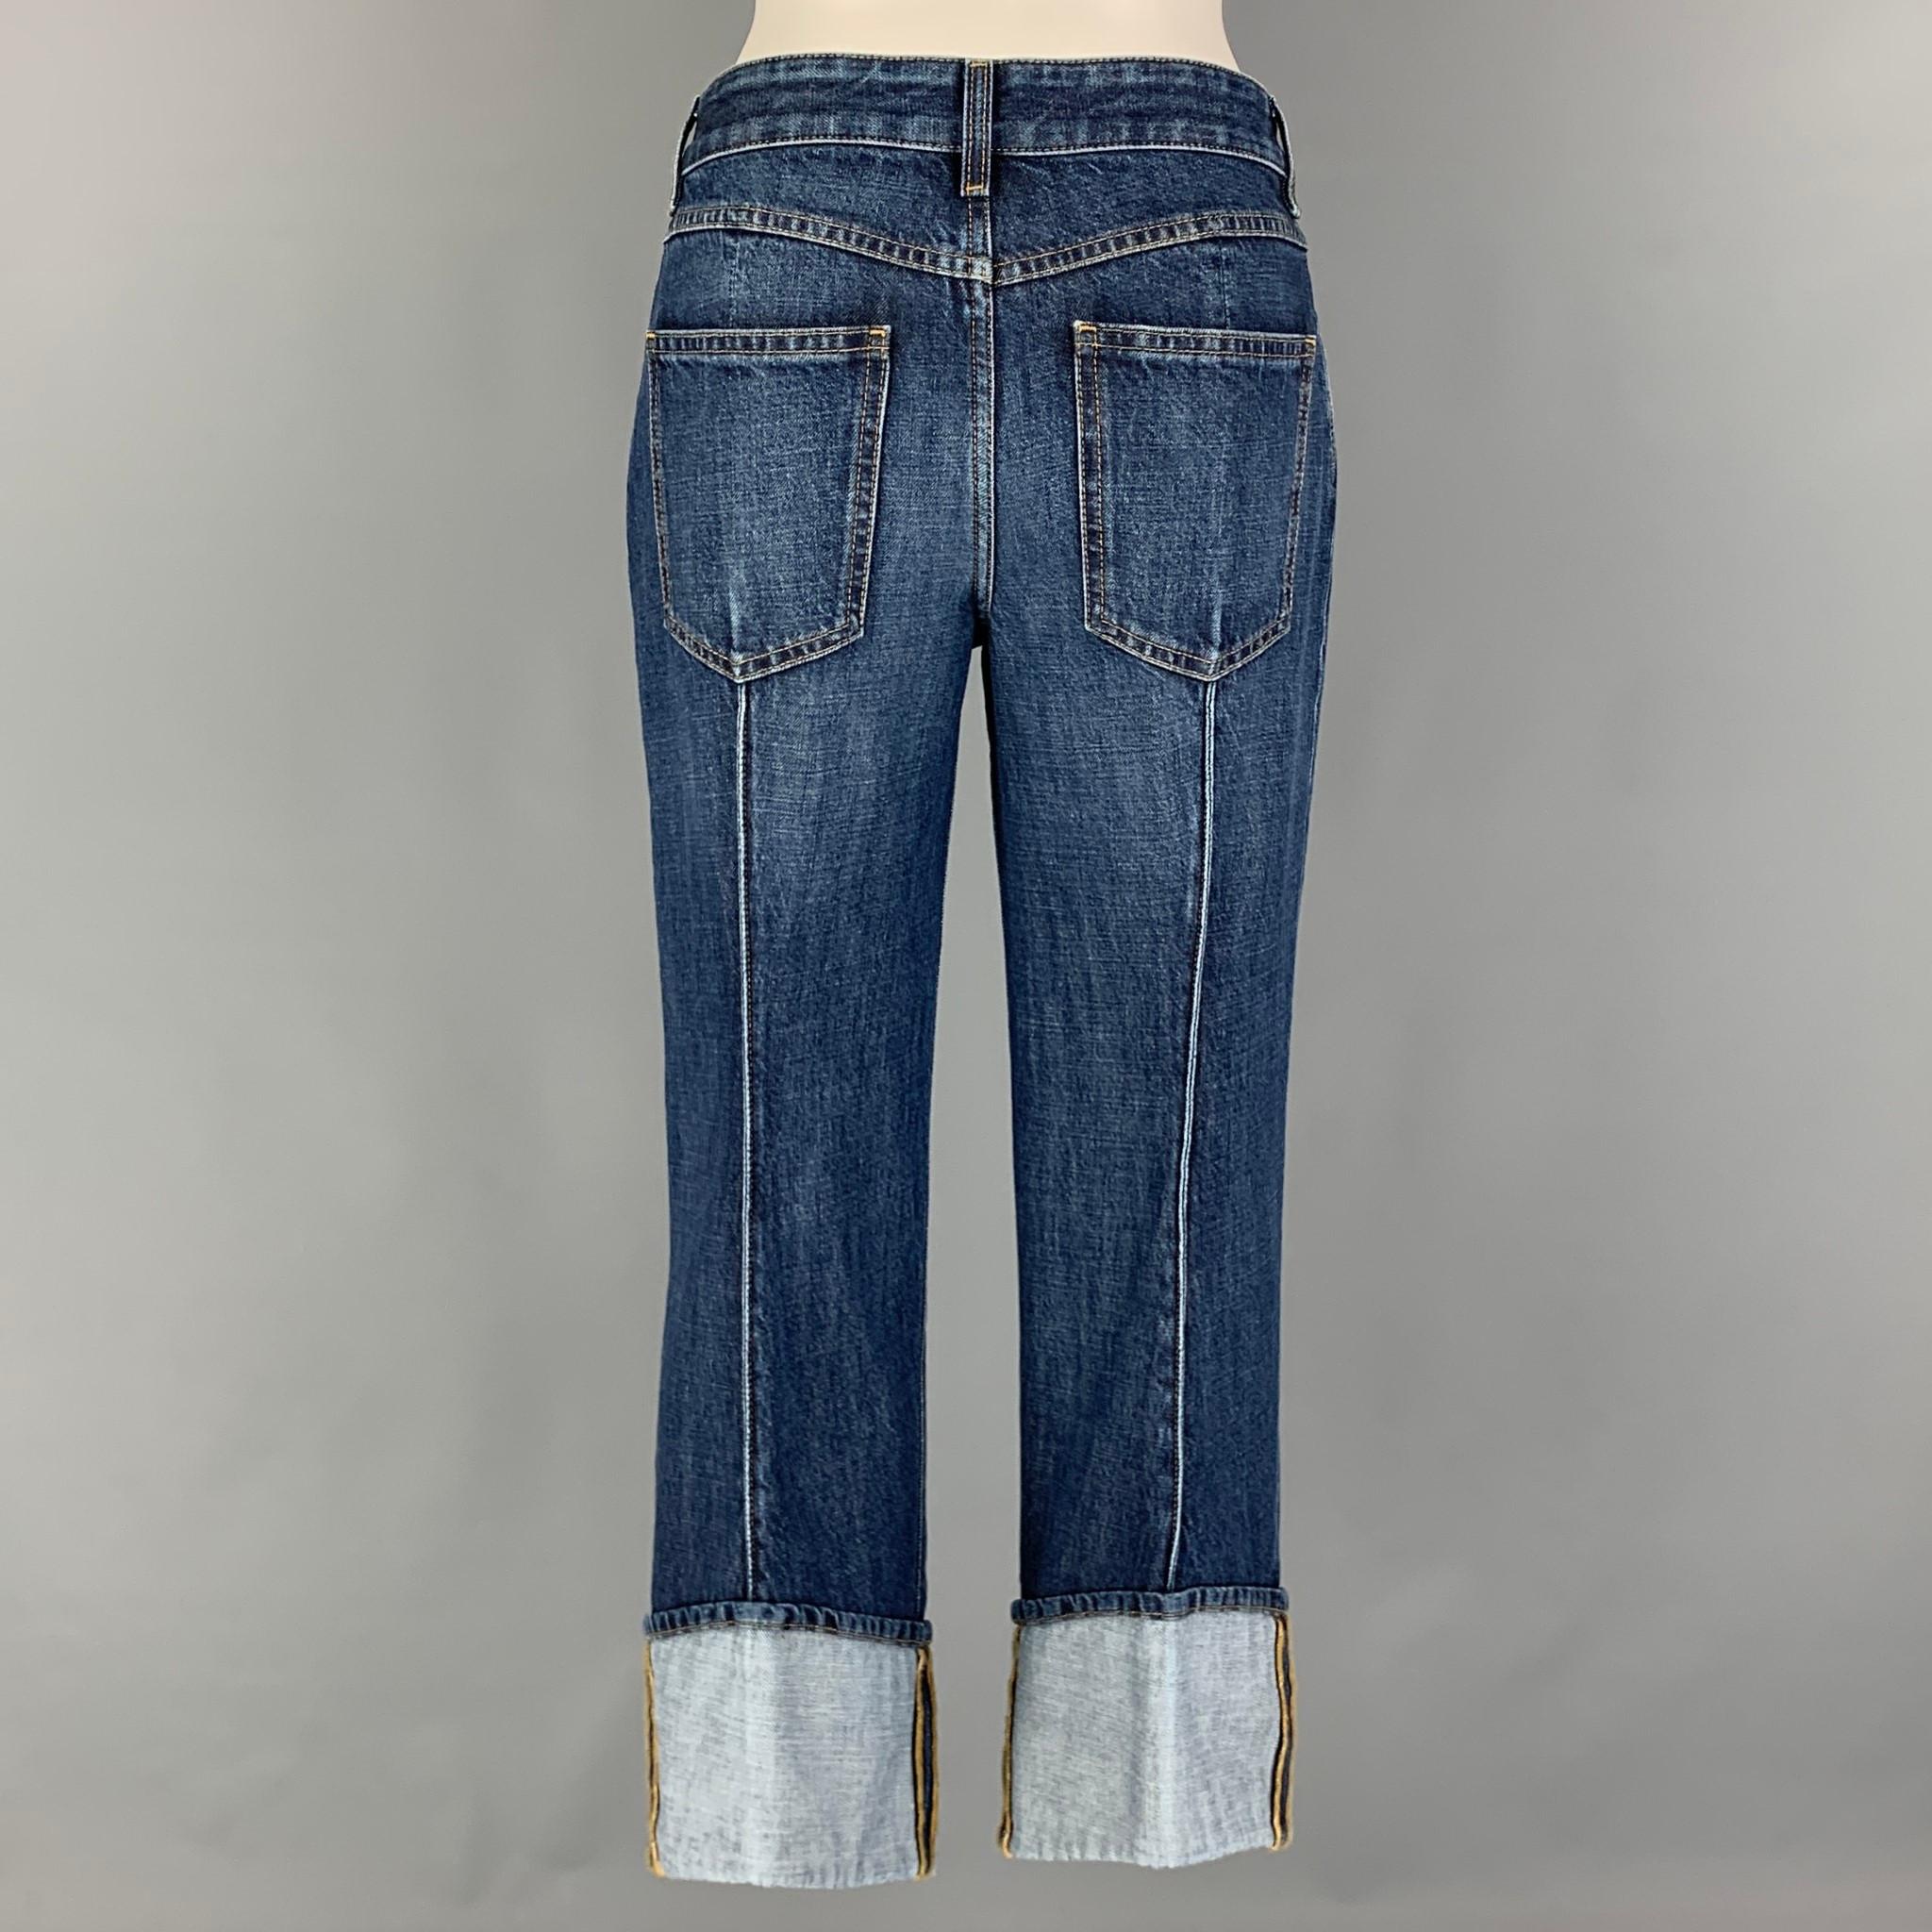 BOTTEGA VENETA jeans comes in a blue washed cotton featuring a cropped leg, pinched seam, cuffed leg, contrast stitching, and a button fly closure. Made in Italy.

Excellent Pre-Owned Condition.
Marked: 36
Original Retail Price: